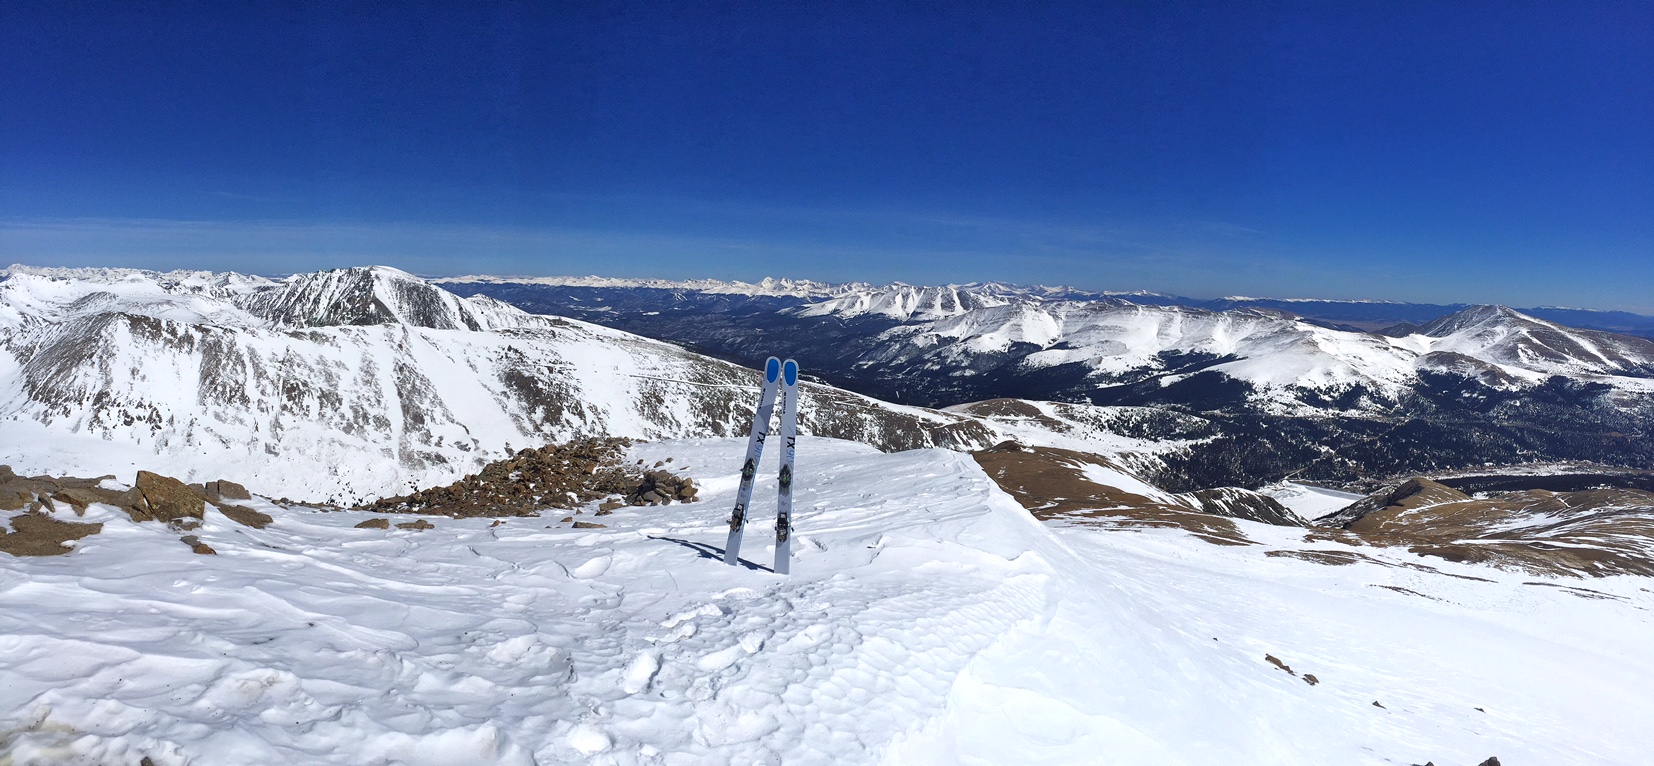 Summit of Lincoln, 14,286' highest in the 10 Mile / Mosquito and 8th highest summit in Colorado.